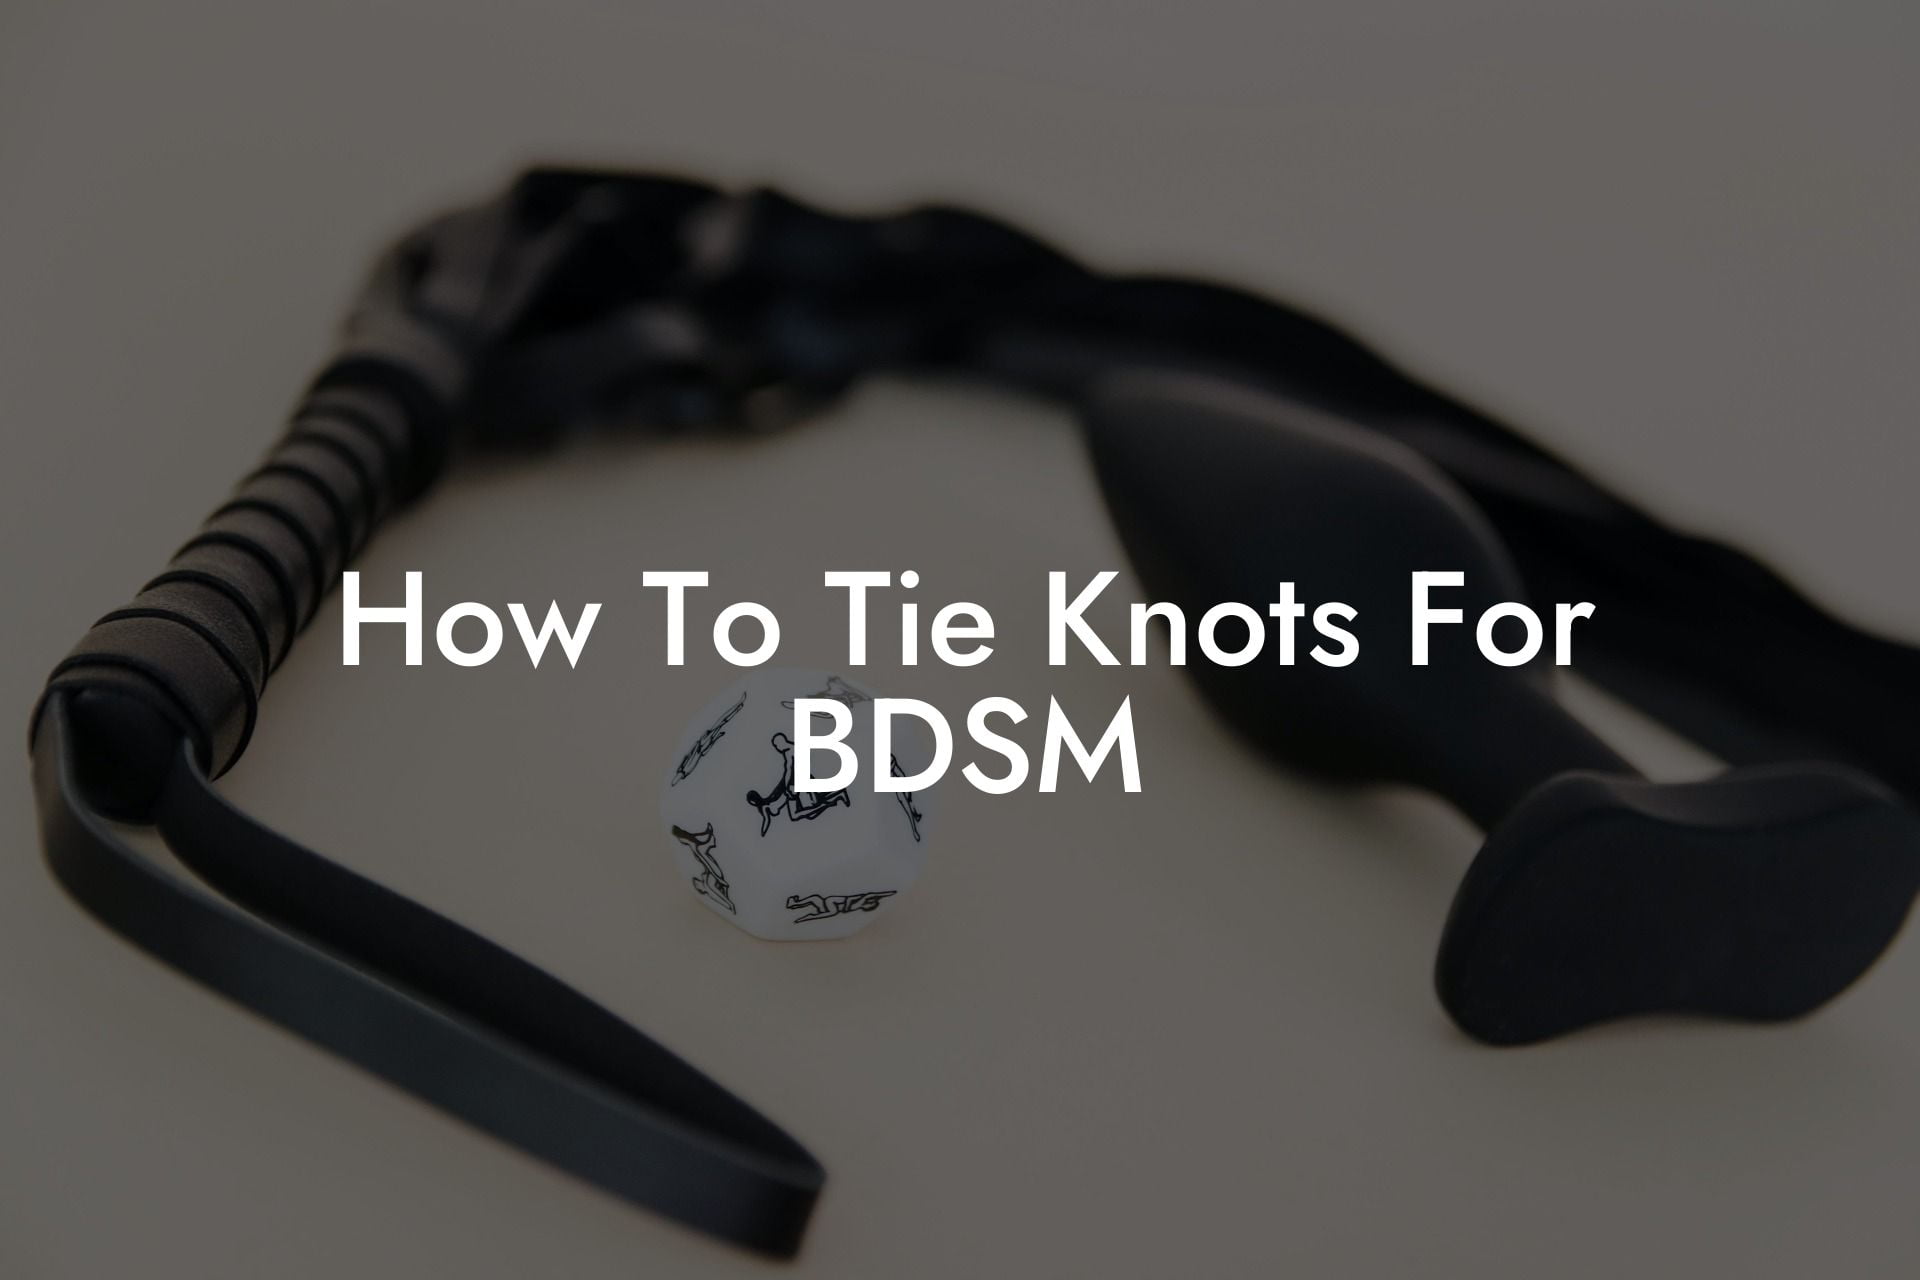 How To Tie Knots For BDSM